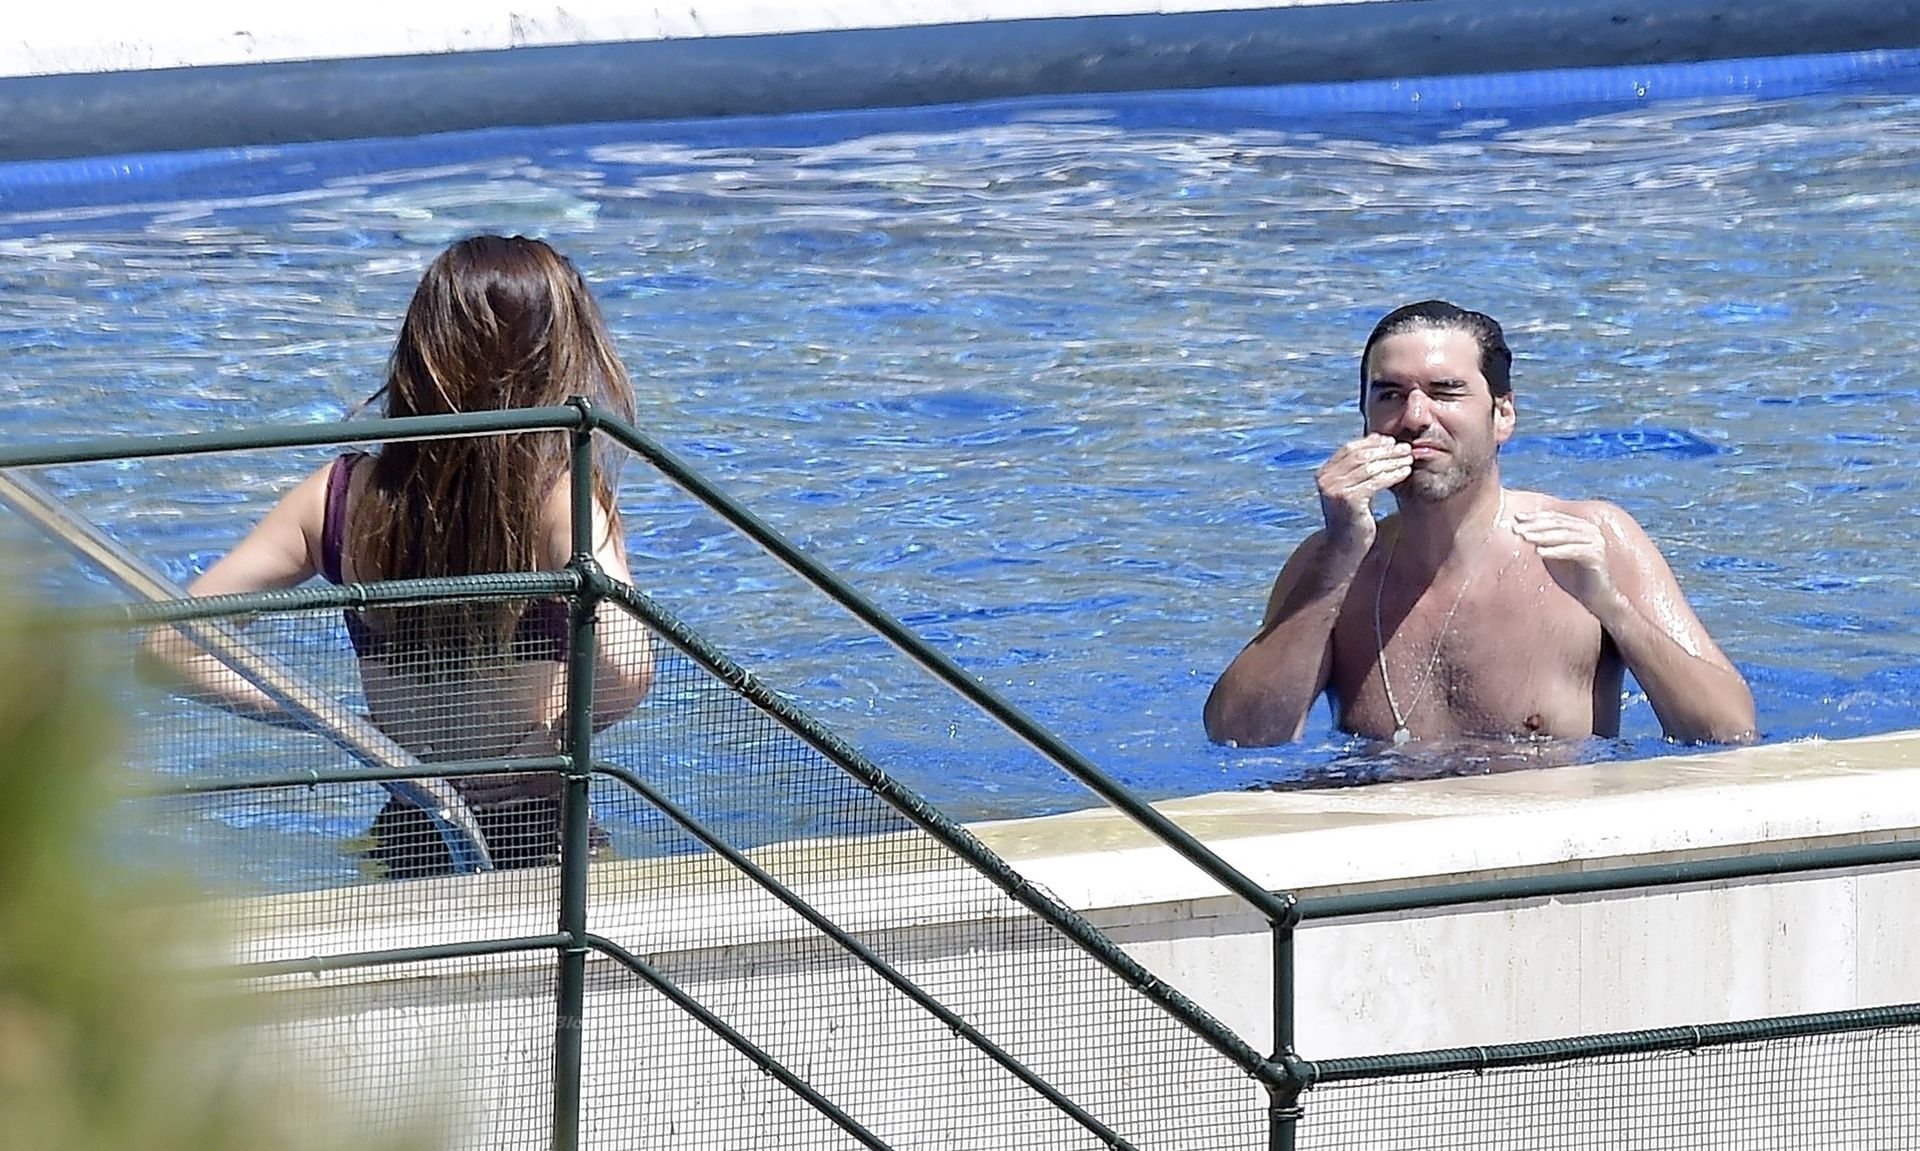 Alex Riviere & Christian Sieber Show Some PDA Out on Their Italian holiday (31 Photos)